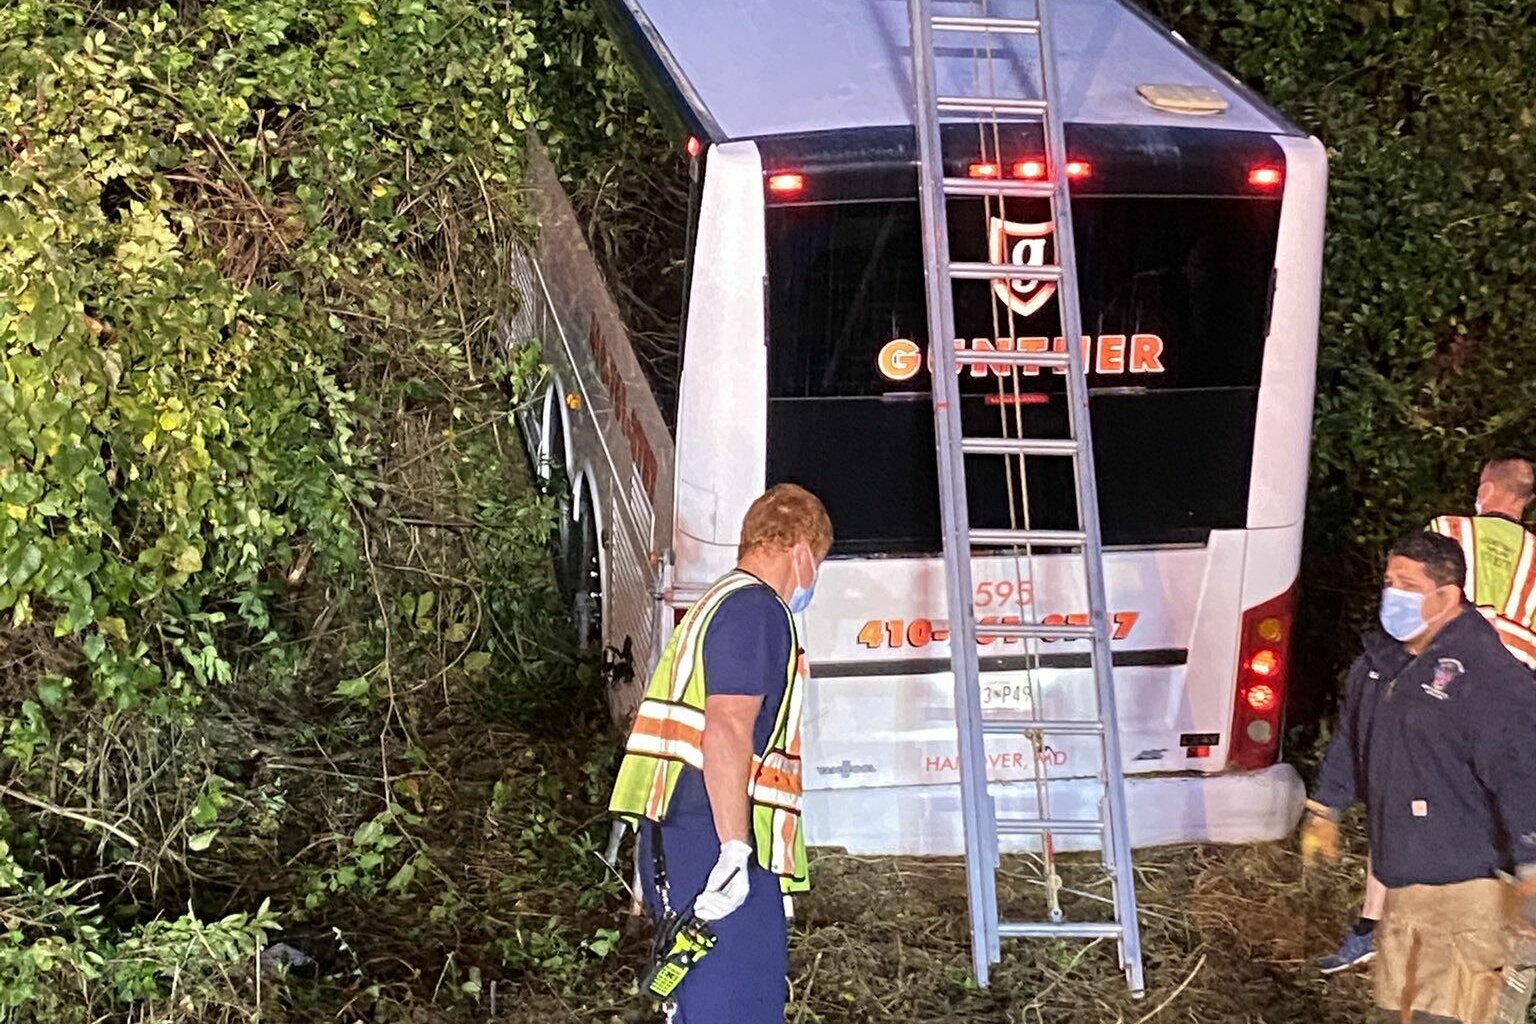 2 bus crashes occur near Metro stations - WTOP